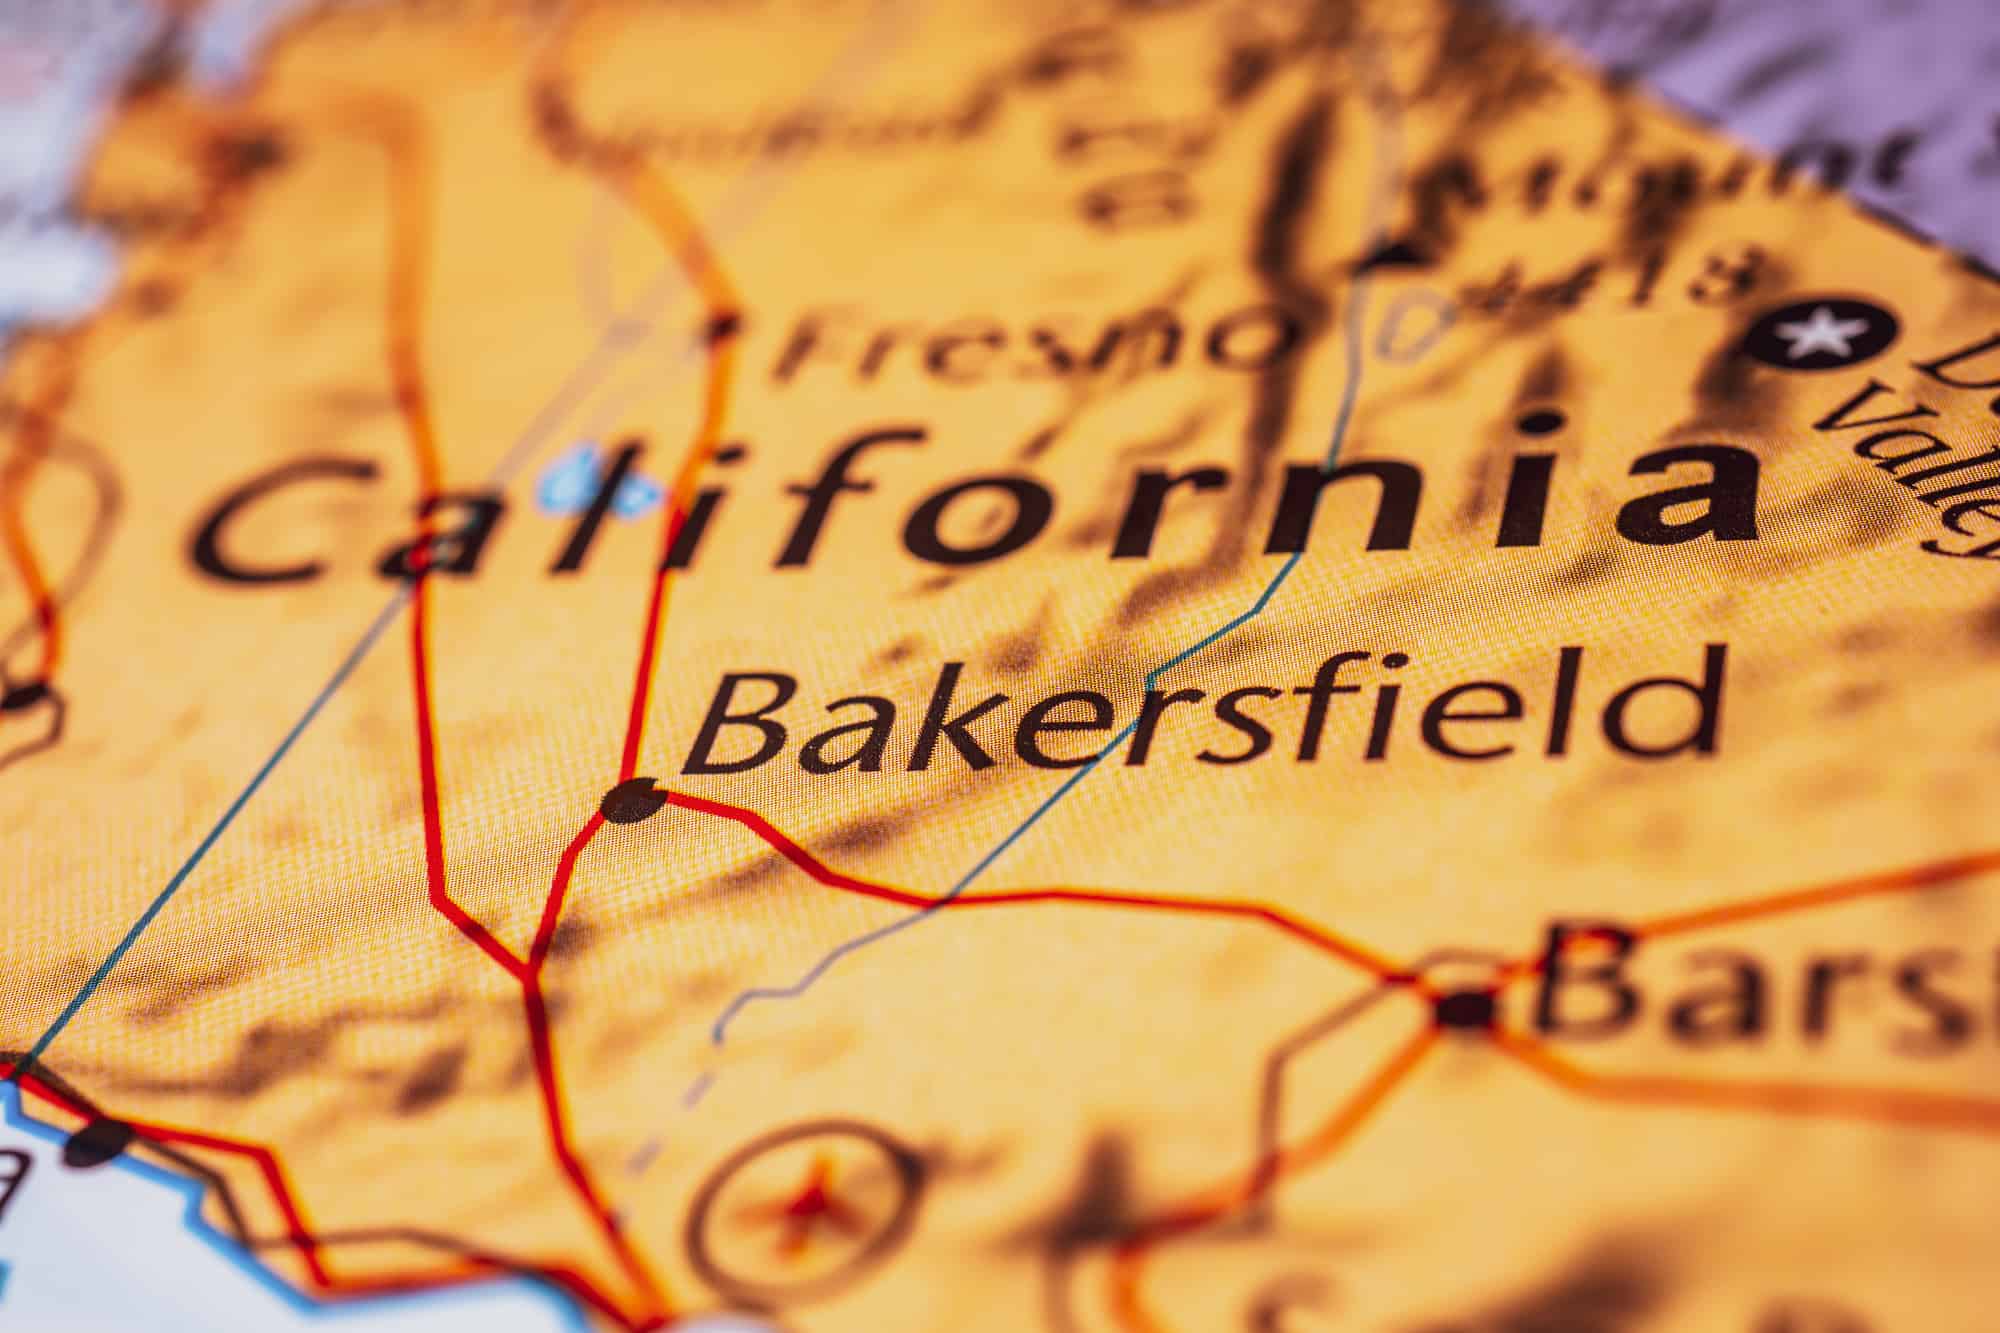 Bakersfield on the map of USA